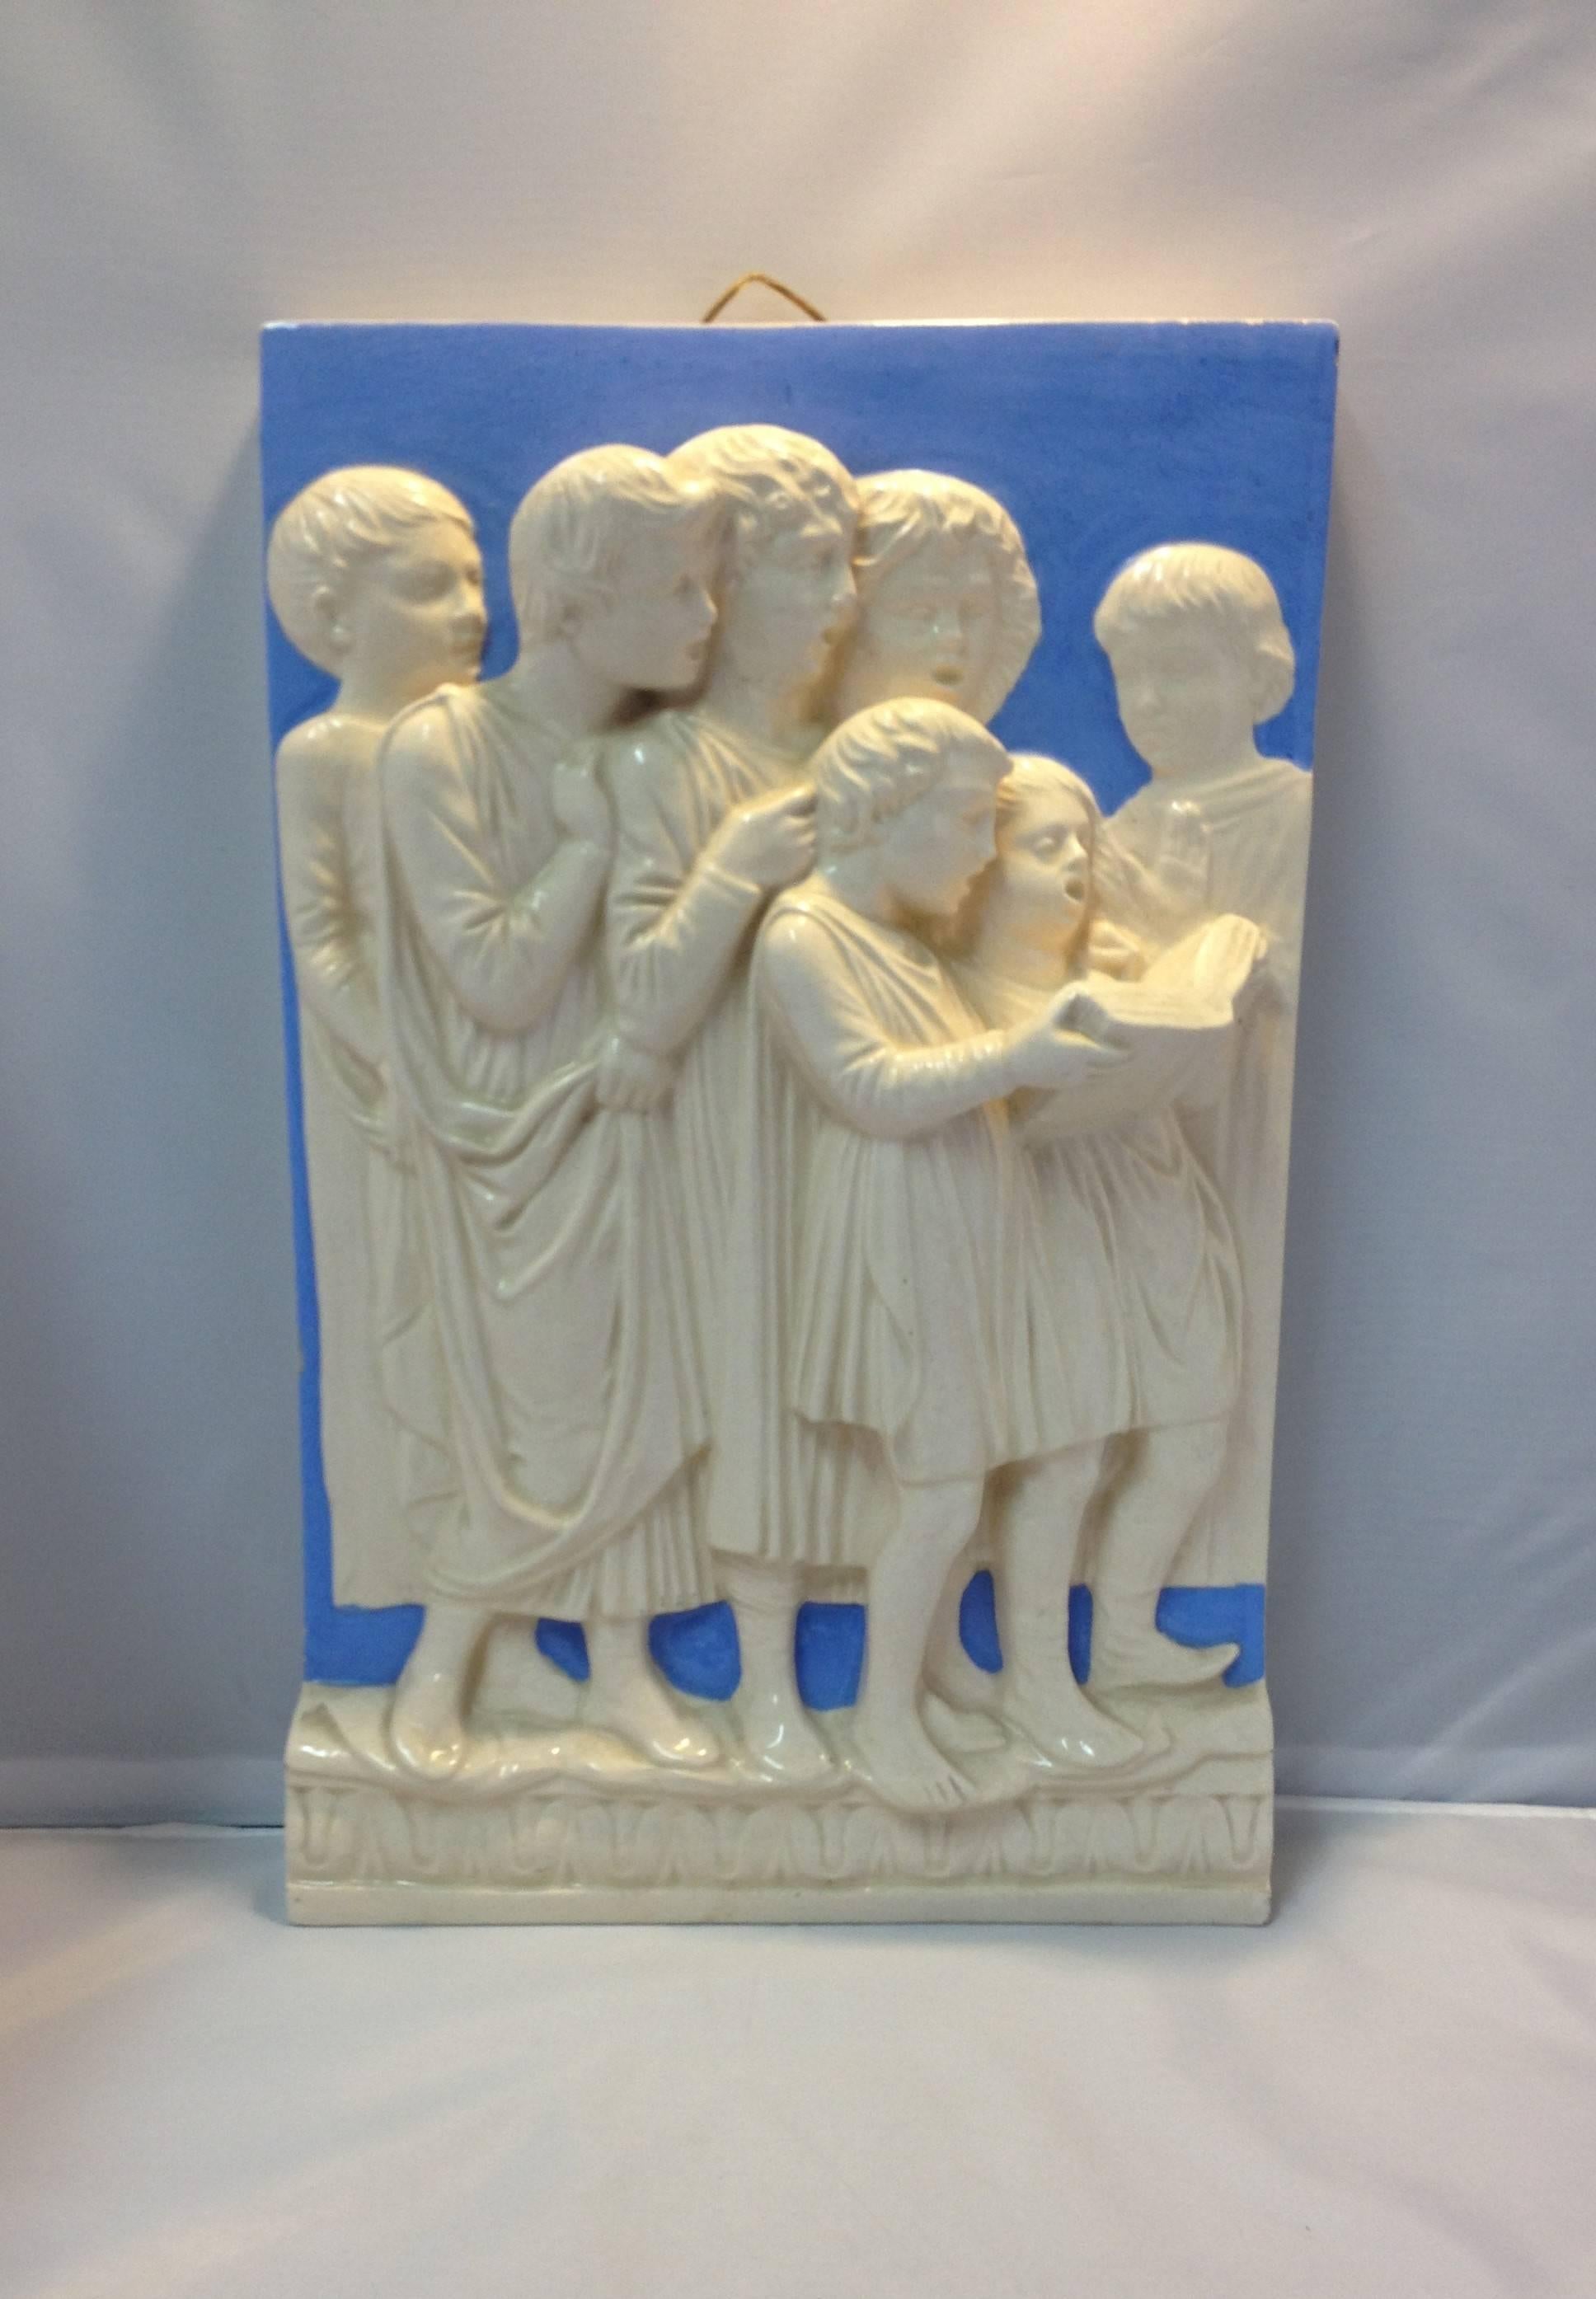 Rectangular high relief Della Robbia polychrome glazed pottery plaque from Italy. The neoclassical work depicts a group of choir boys singing from a hymnal in a Classic Della Robbia blue and white glaze, circa early 20th century.
    